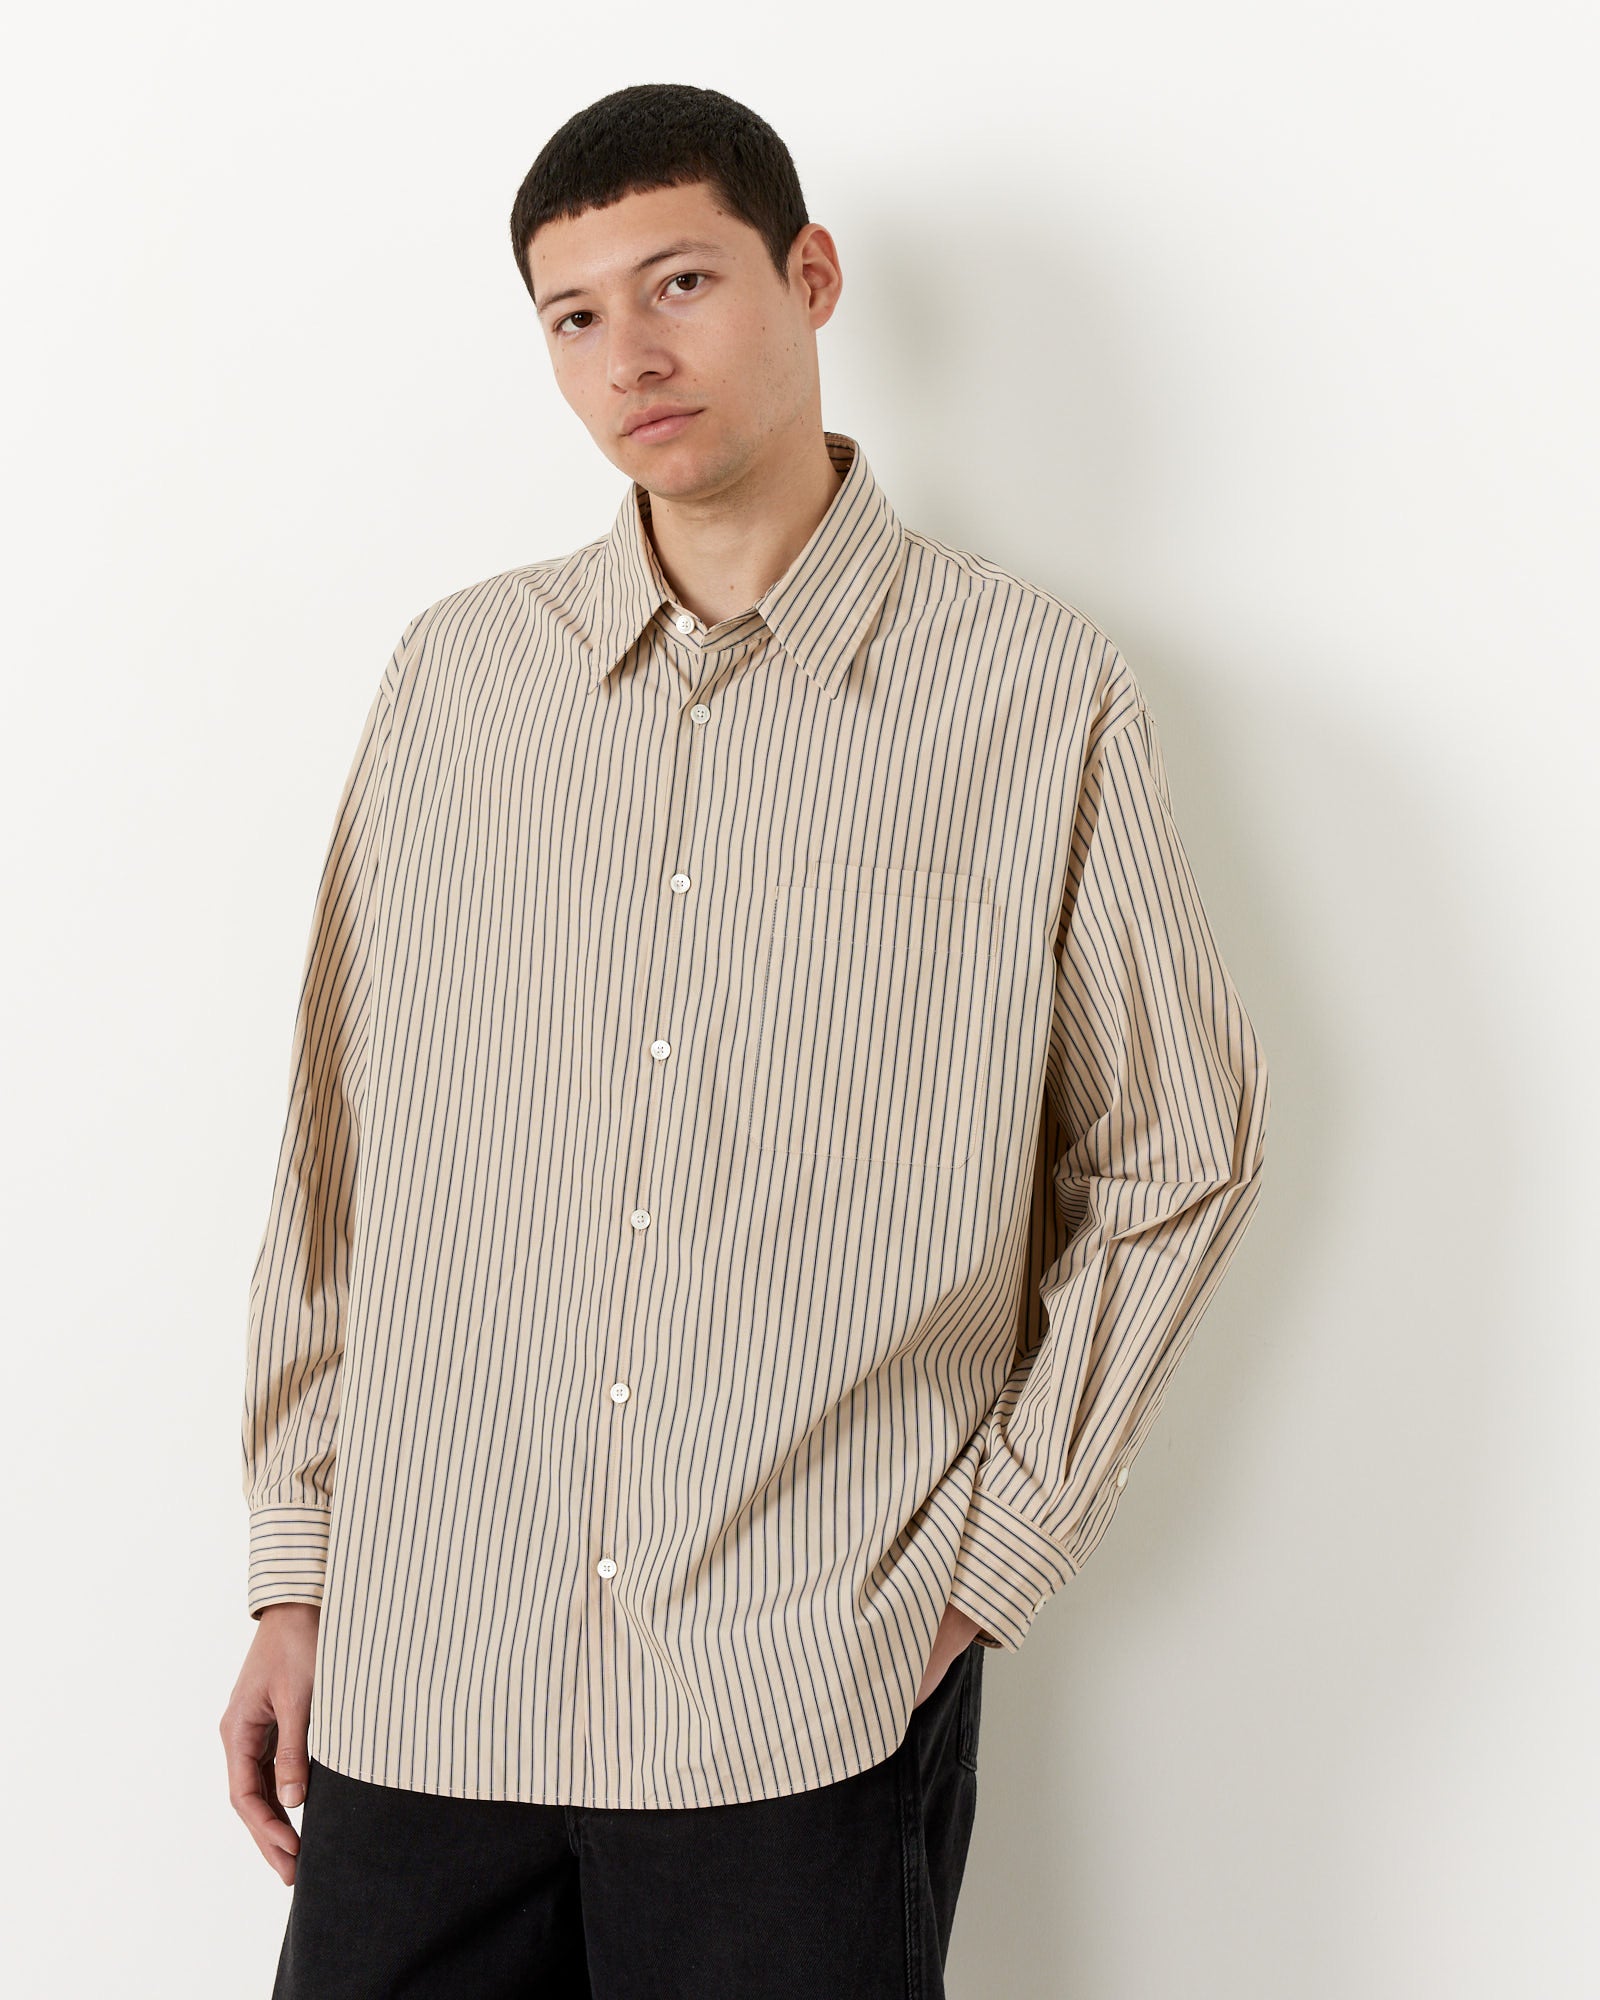 Double Pocket Shirt in Mastic/Navy/White